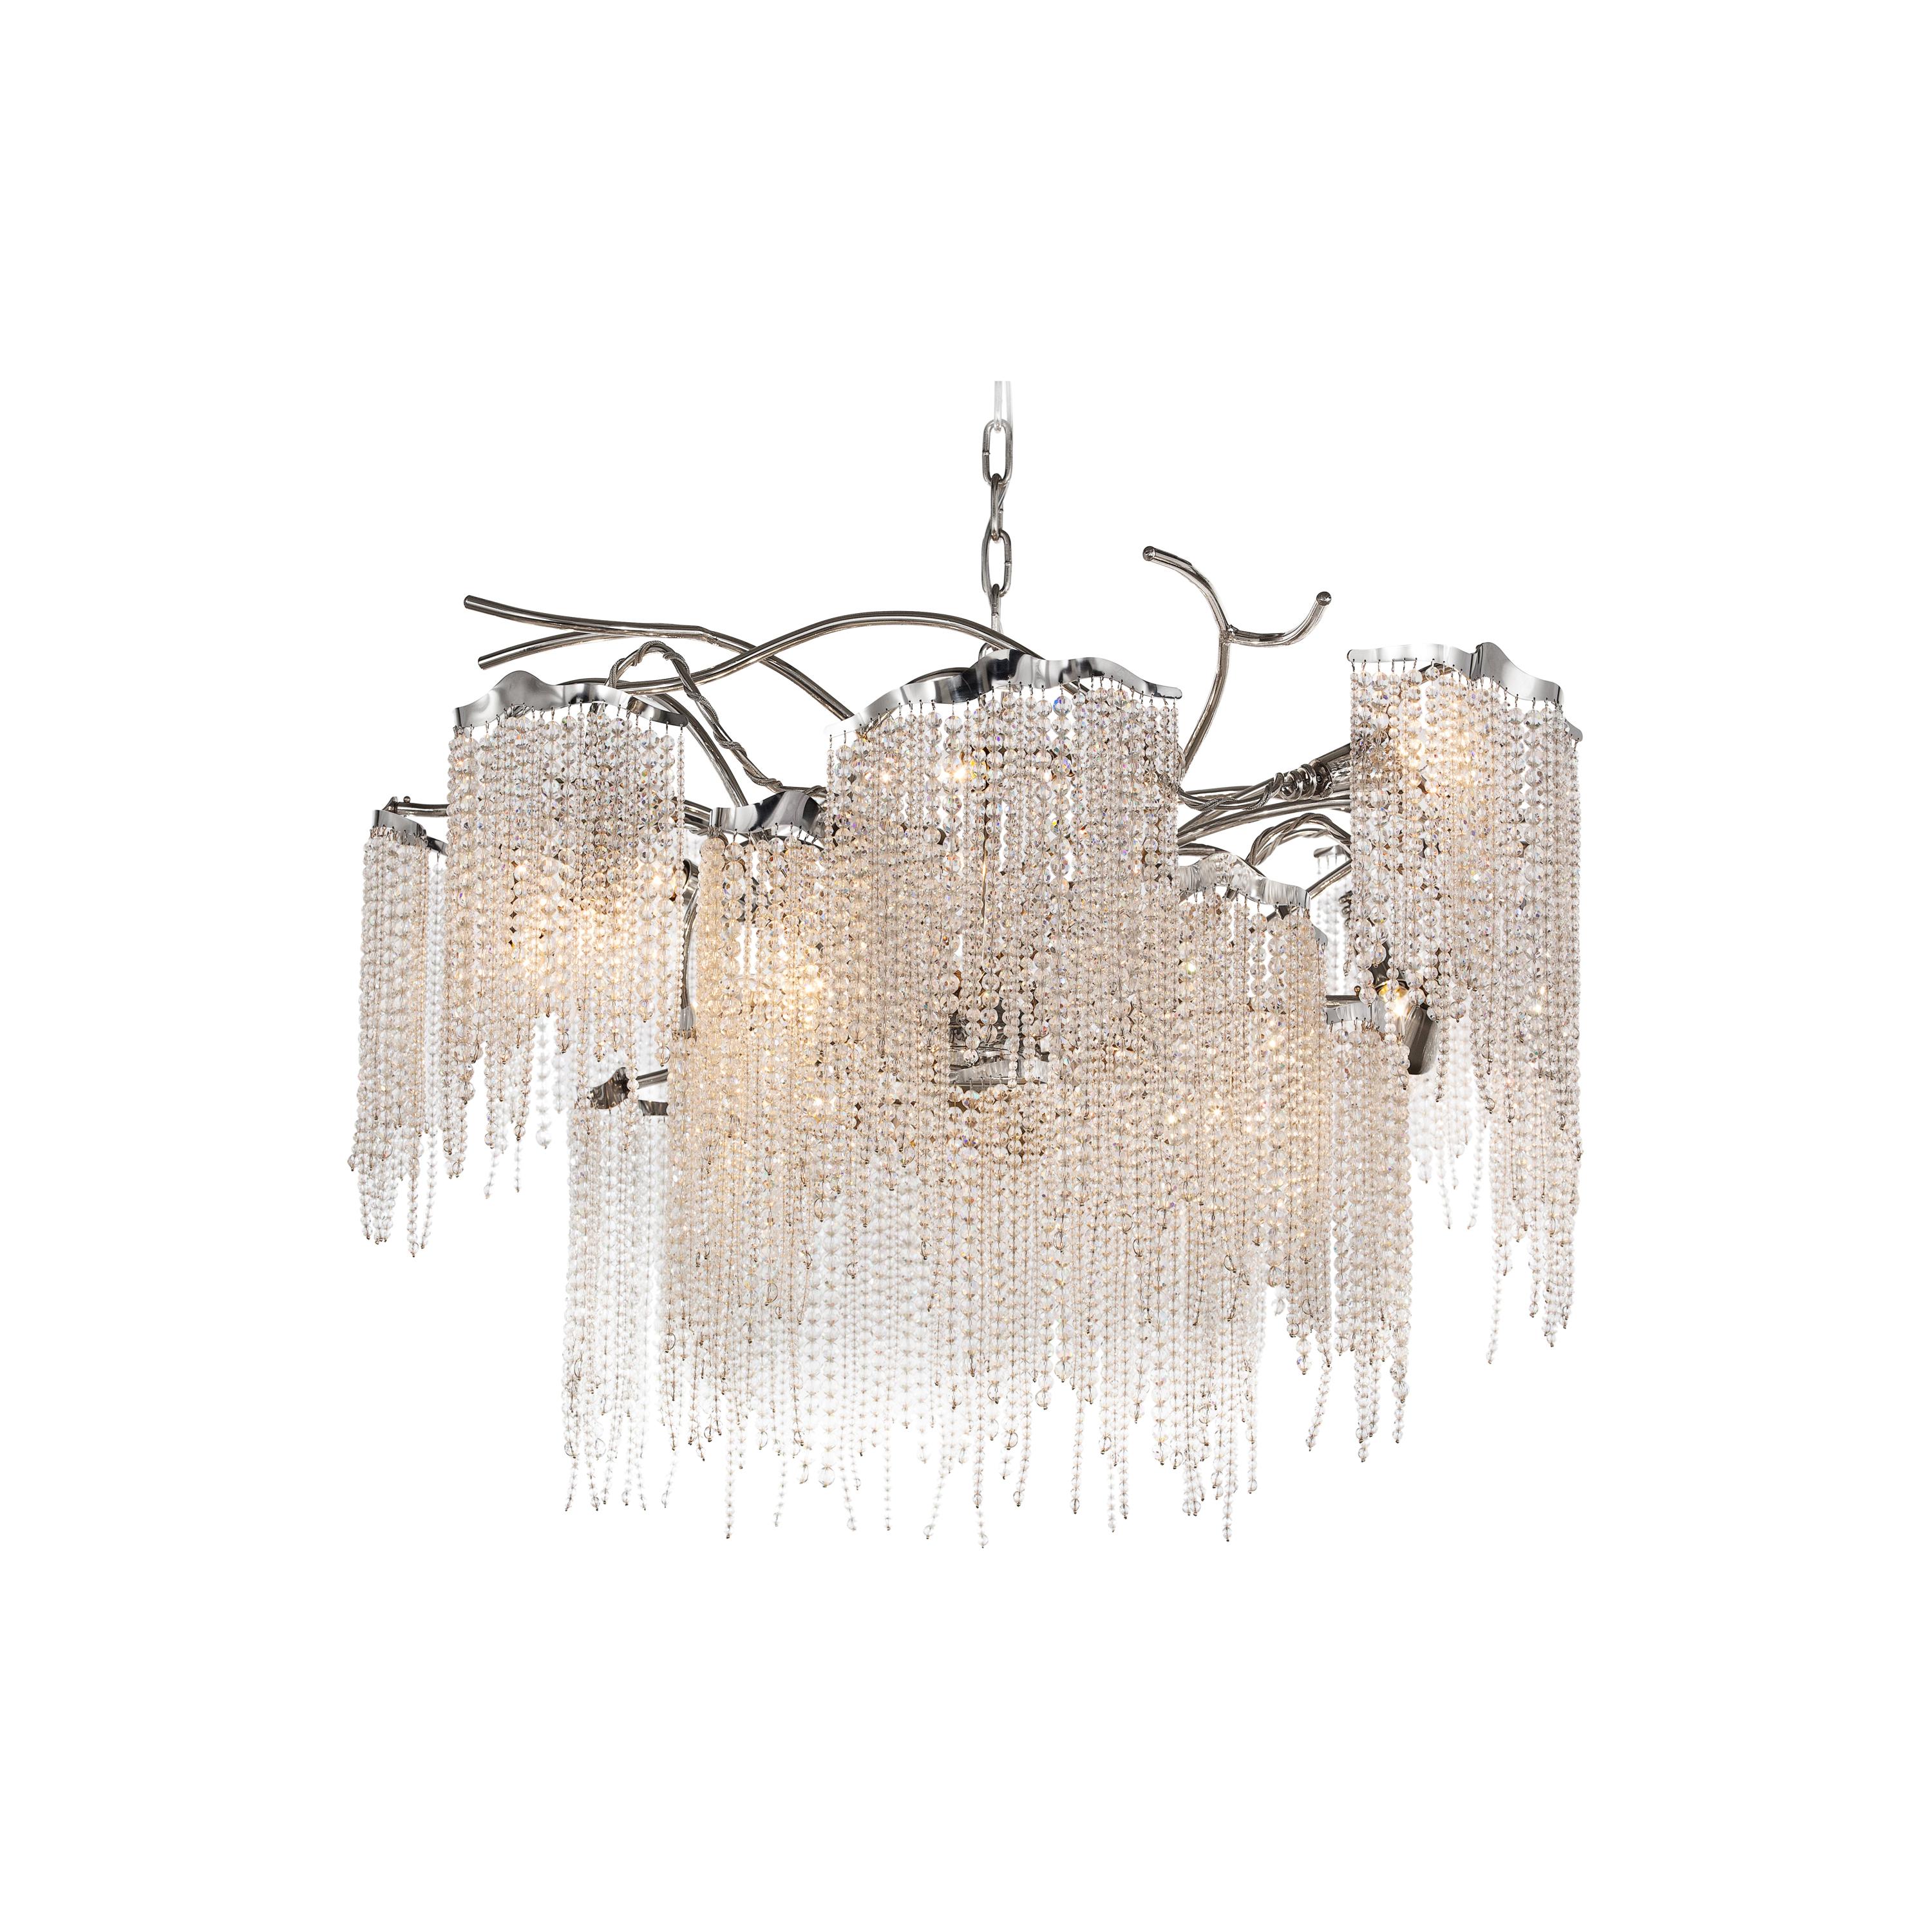 Modern Chandelier in a Nickel Finish with Crystals, Victoria Collection